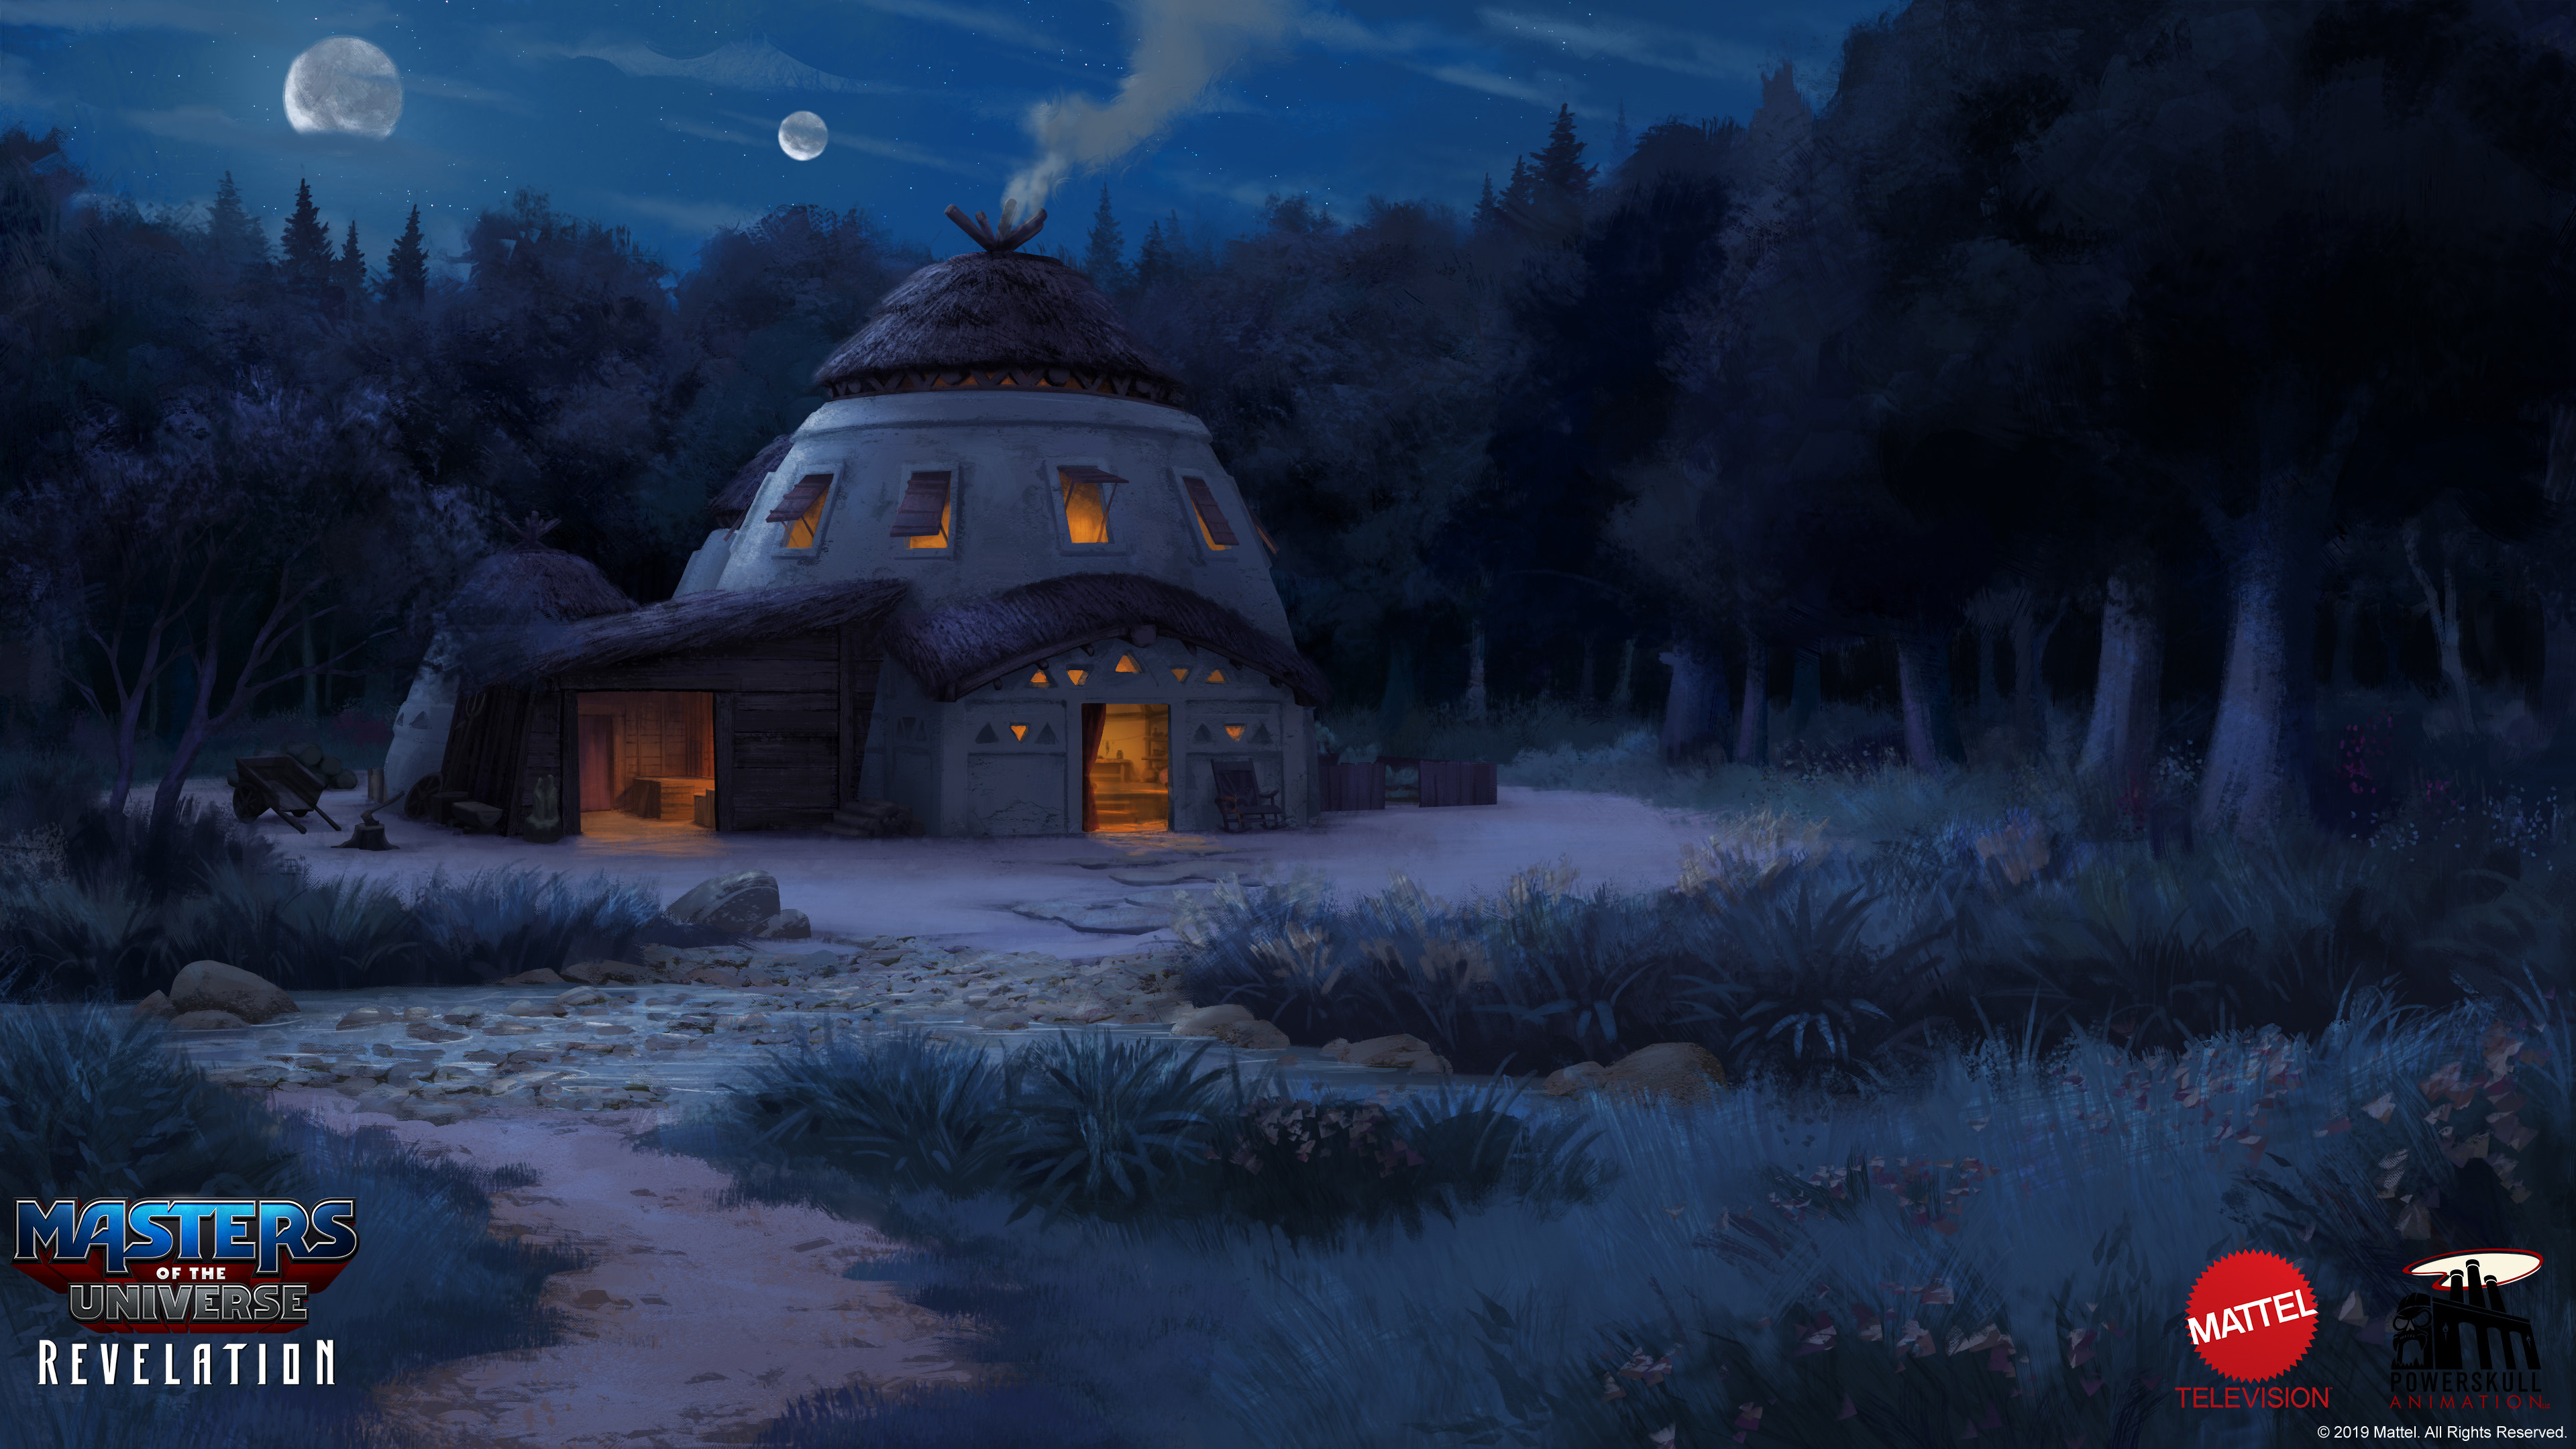 HD desktop wallpaper featuring a serene nighttime scene from Masters of the Universe: Revelation, with a cozy hut under a moonlit sky.